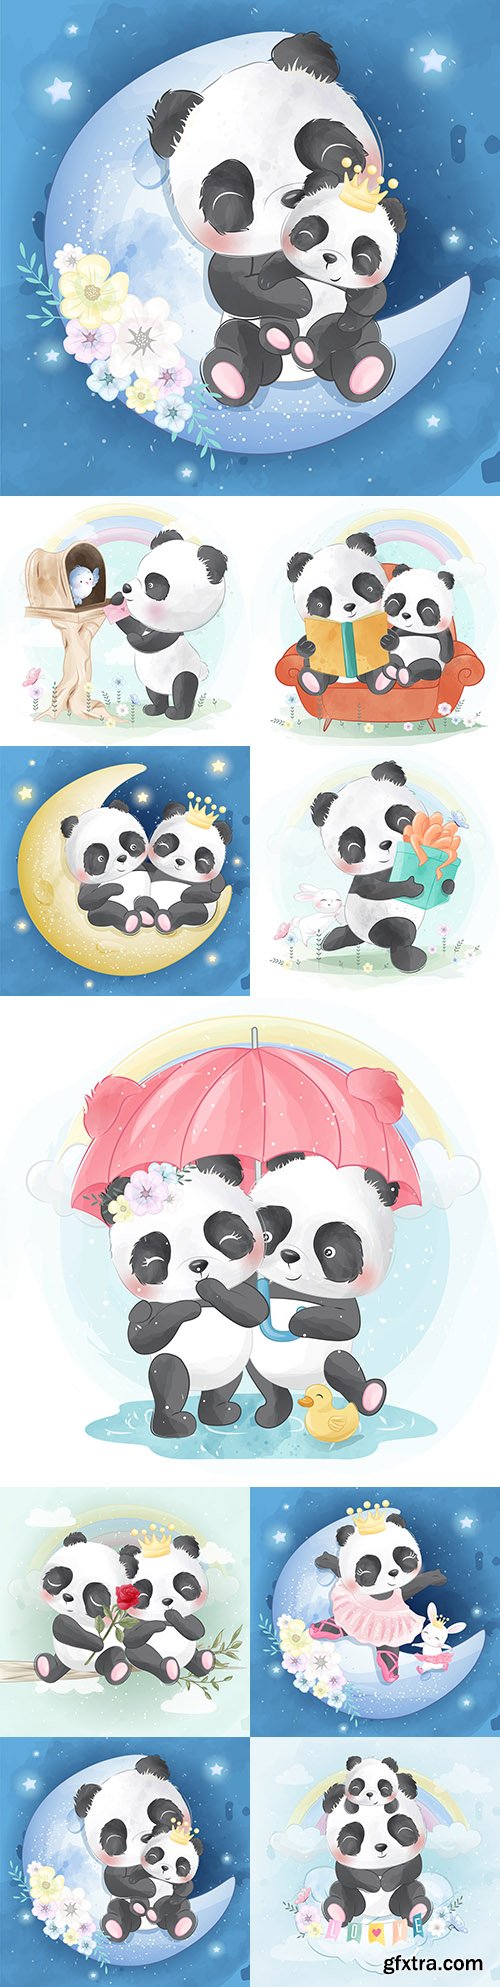 Cute panda with mom funny drawn illustrations
